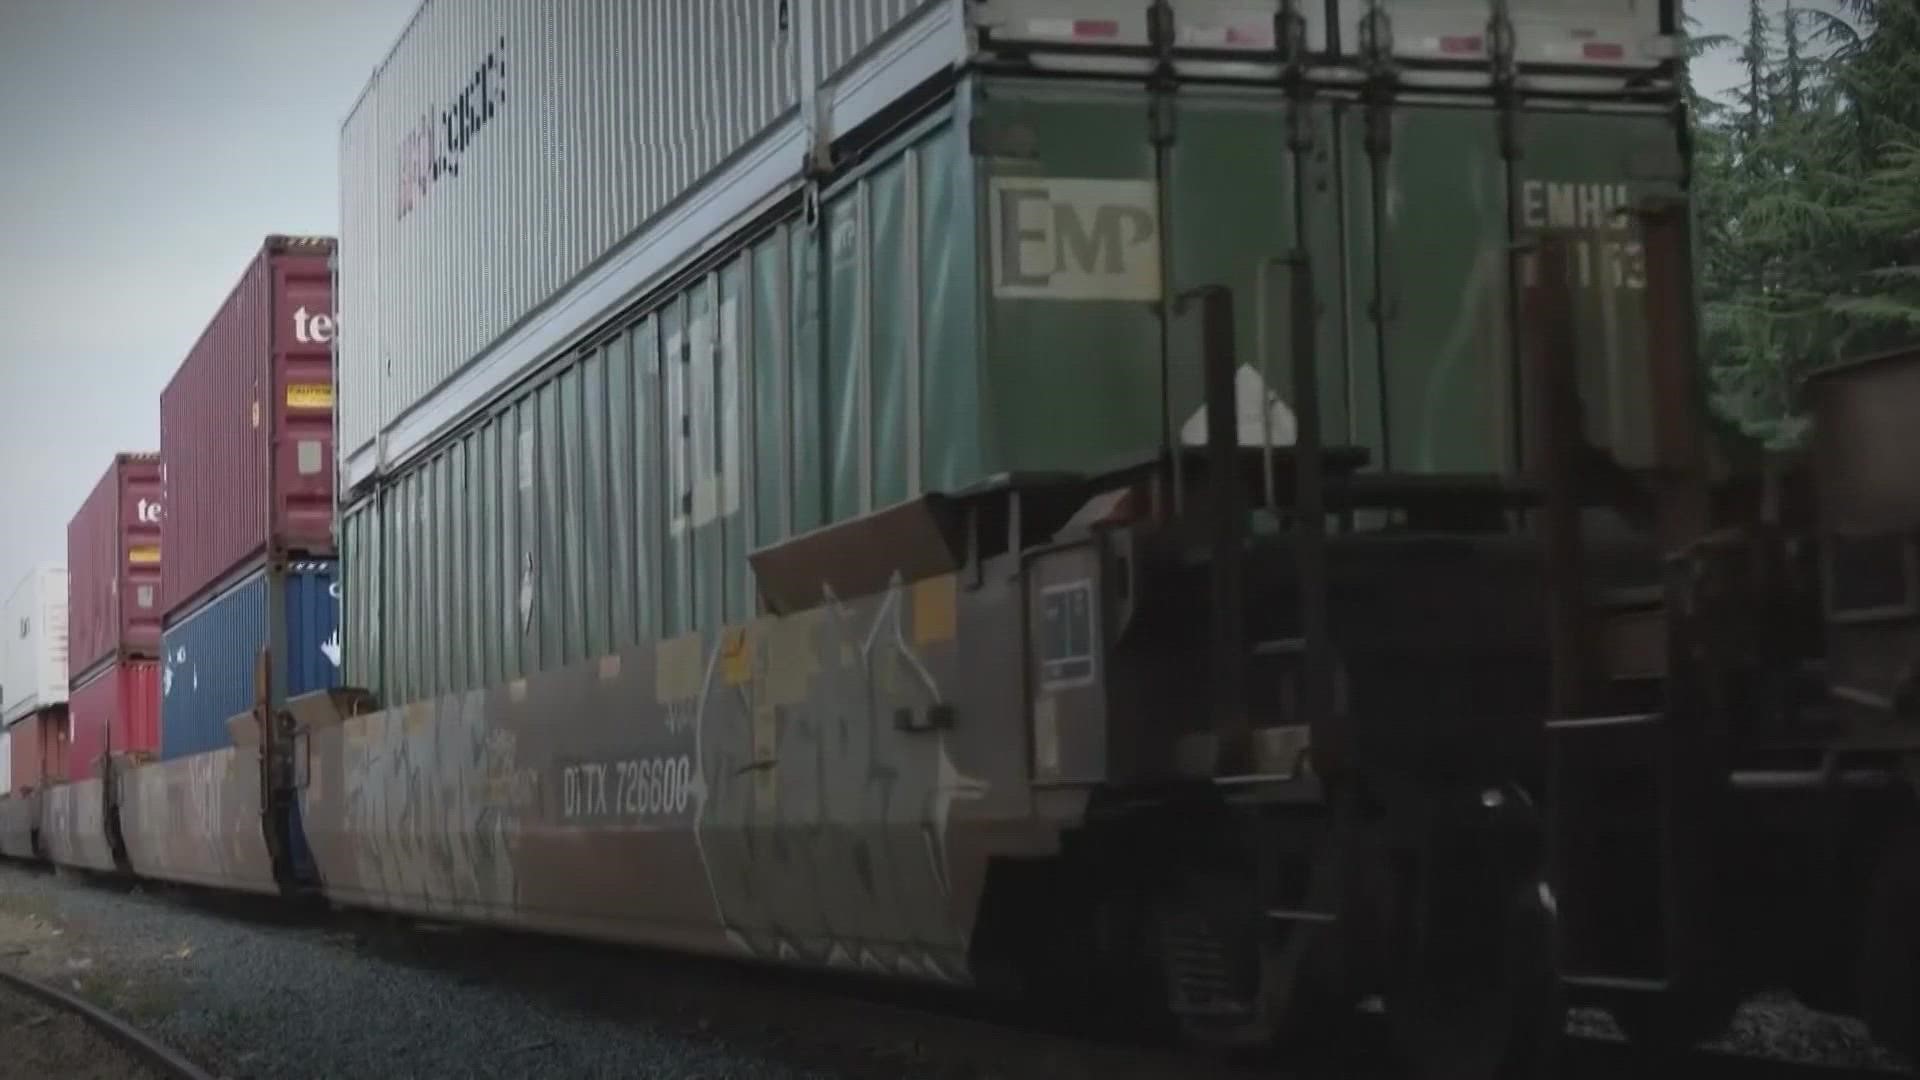 Lawmakers voted in favor of imposing a labor agreement on a dozen rail unions.